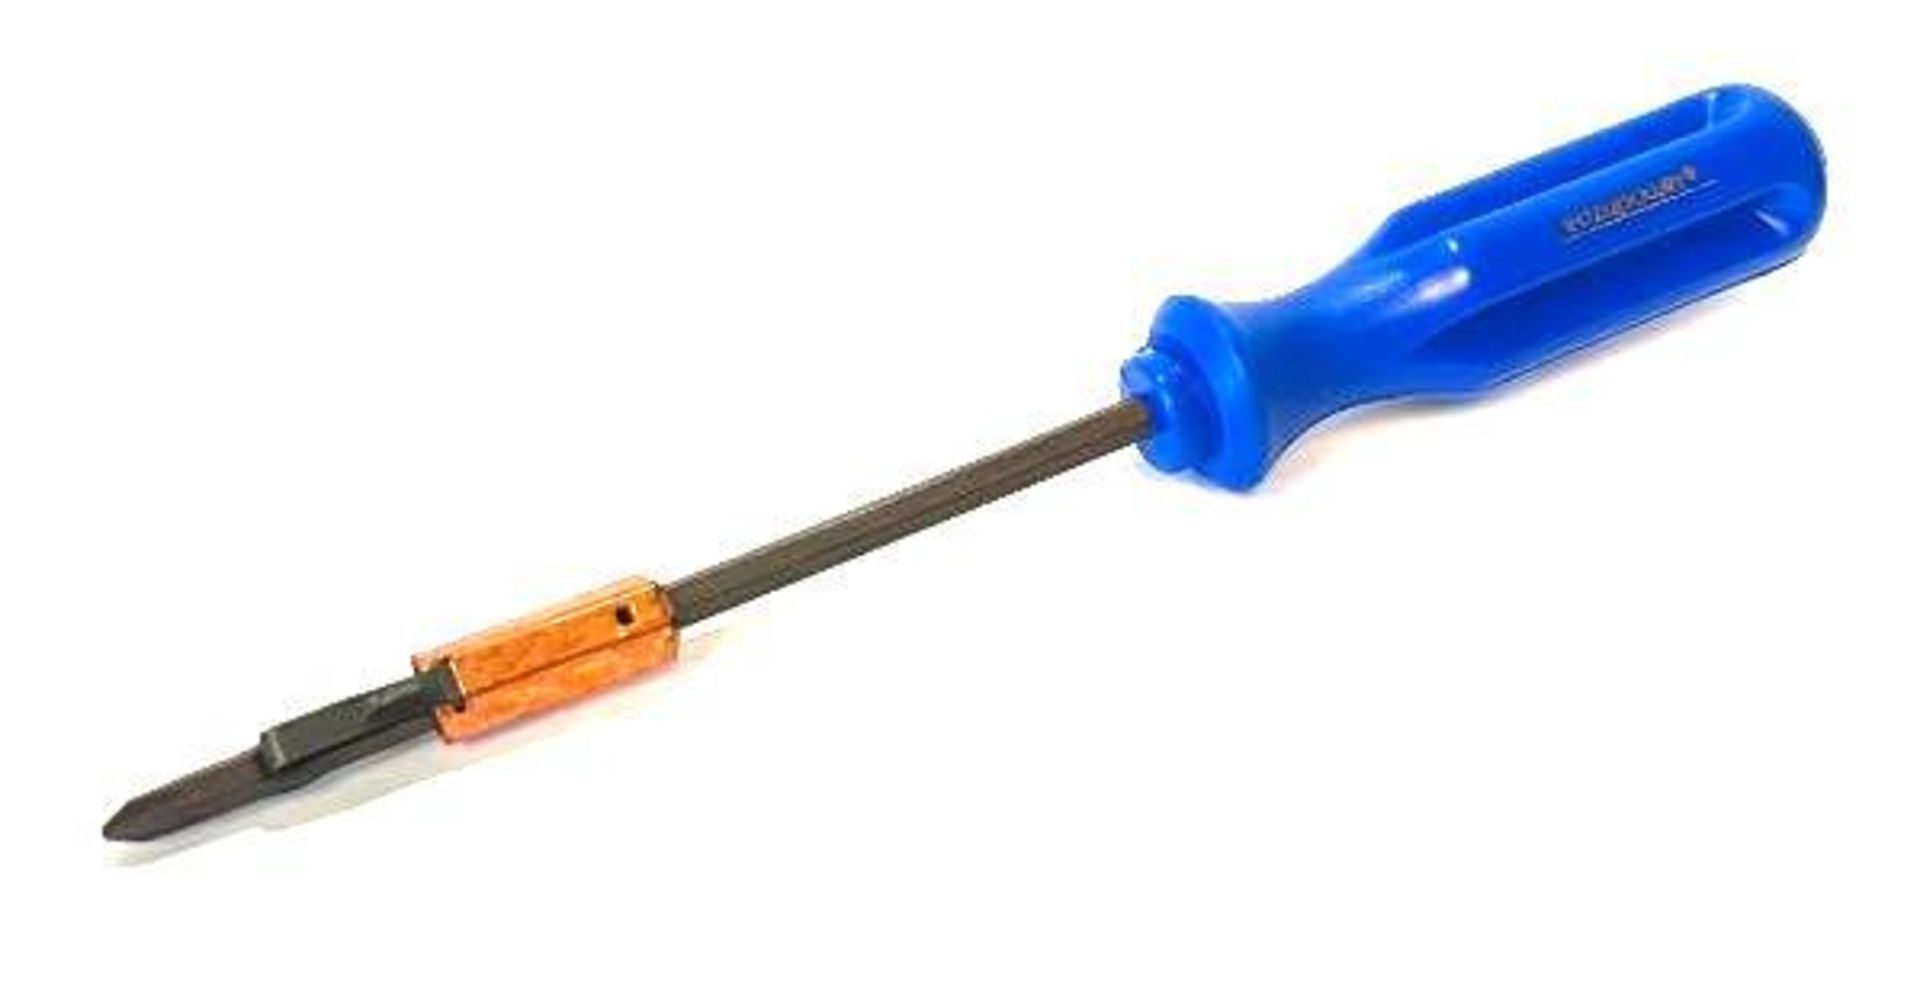 (200) 4" PHILLIPS SPRING CLIP SCREWDRIVERS BRAND/MODEL: EAZYPOWER 80801 INFORMATION: (1) 200CT BOX R